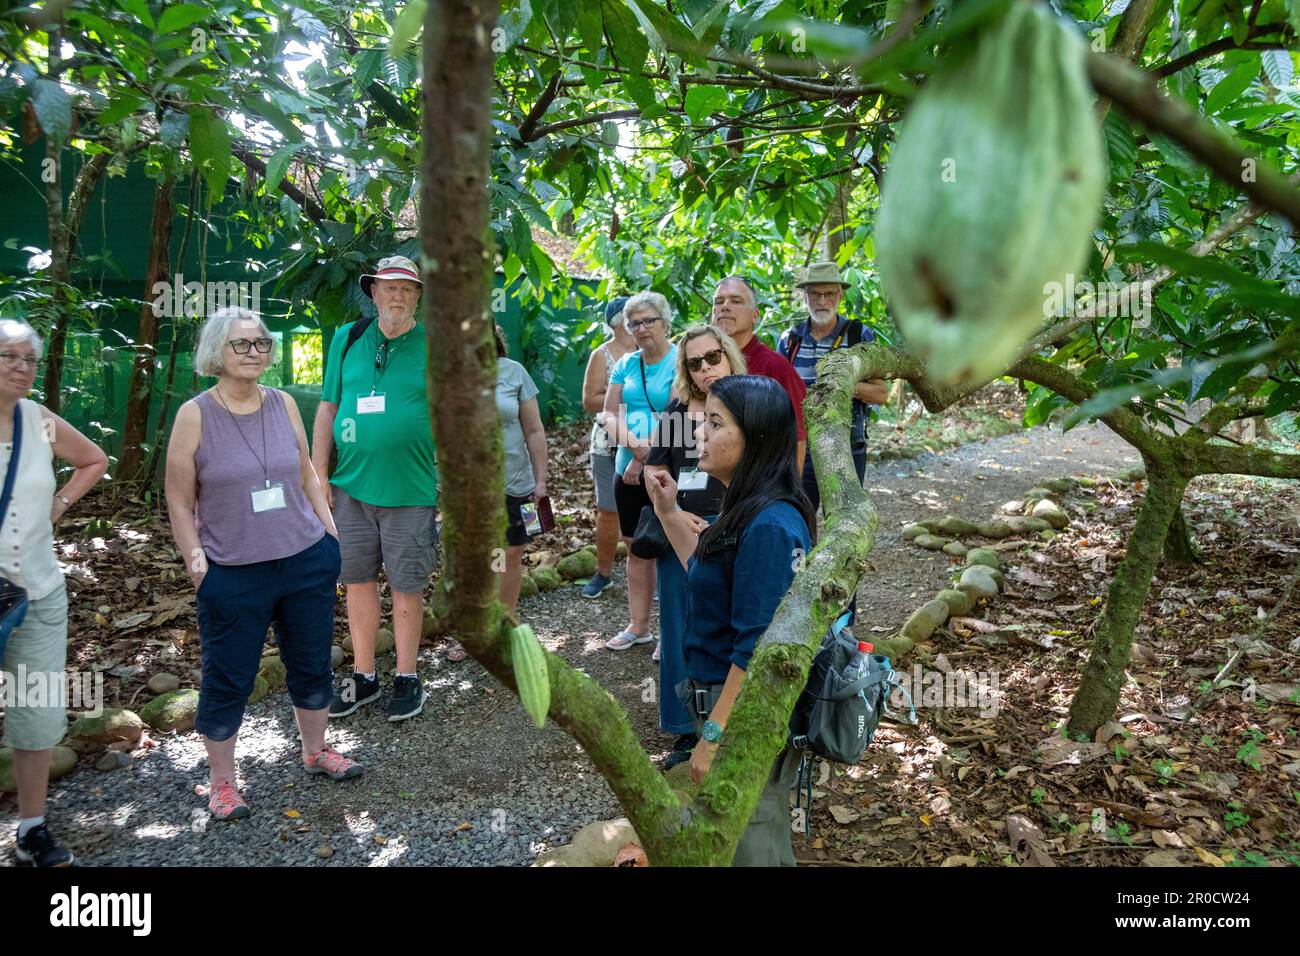 La Virgen, Costa Rica - Visitors to the Tirimbina research station learn about the cacao plant and how chocolate is made from cacao beans. A green cac Stock Photo